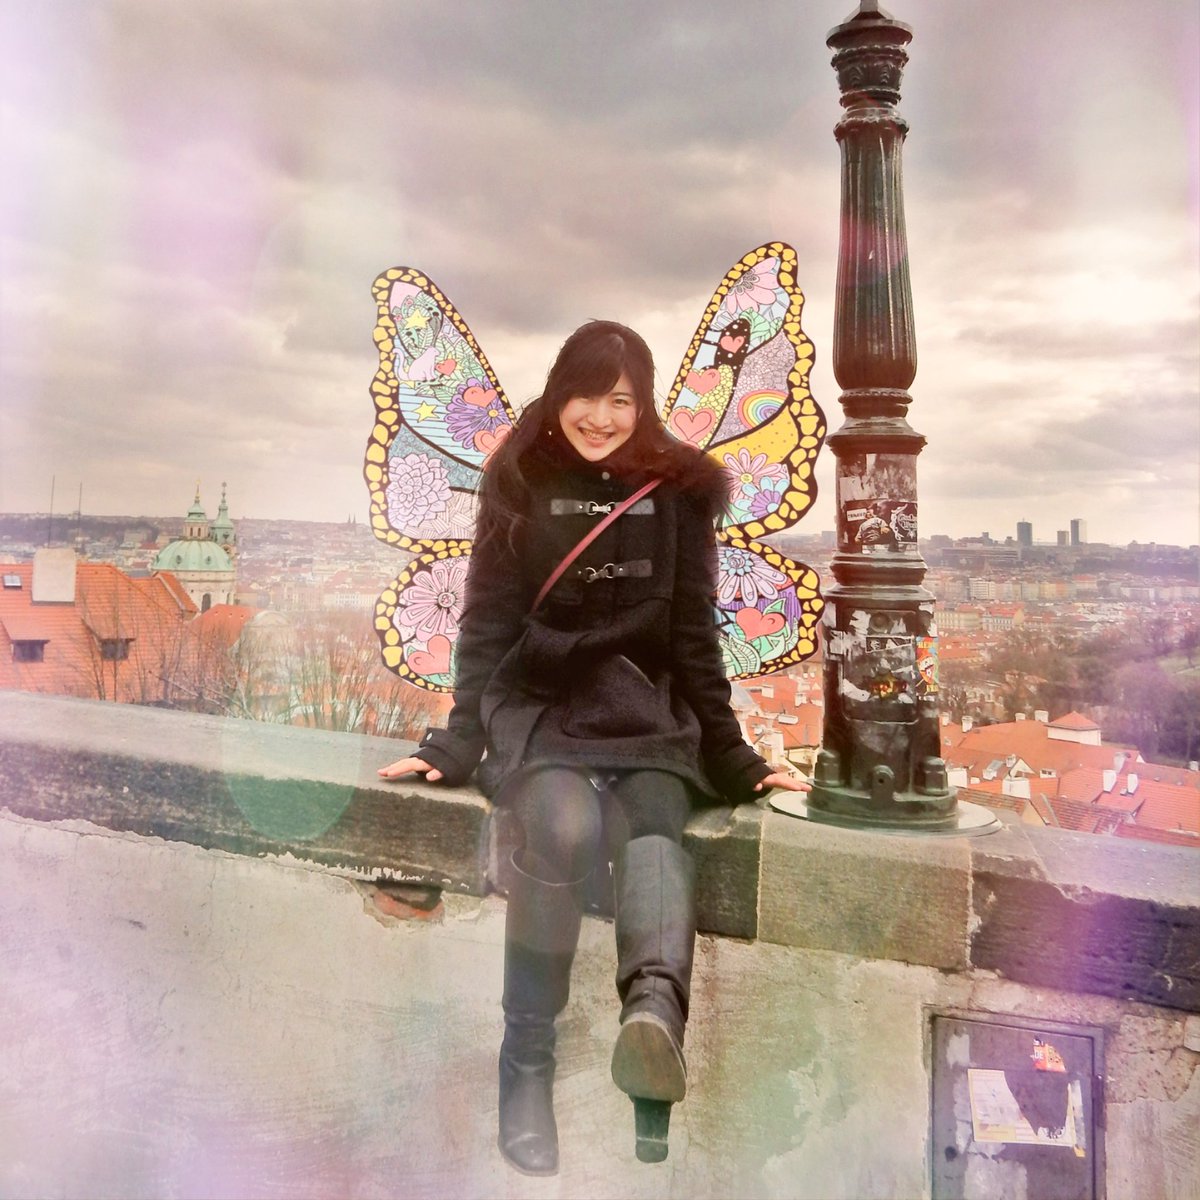 I got the wings!!!!! Awww I really love that. Can't stop smiling.😍🌈🦋🌈 @taylorswift13 @taylornation13 #MeOutNow 
(I miss Europe so much, btw. I wish I could live there again…)